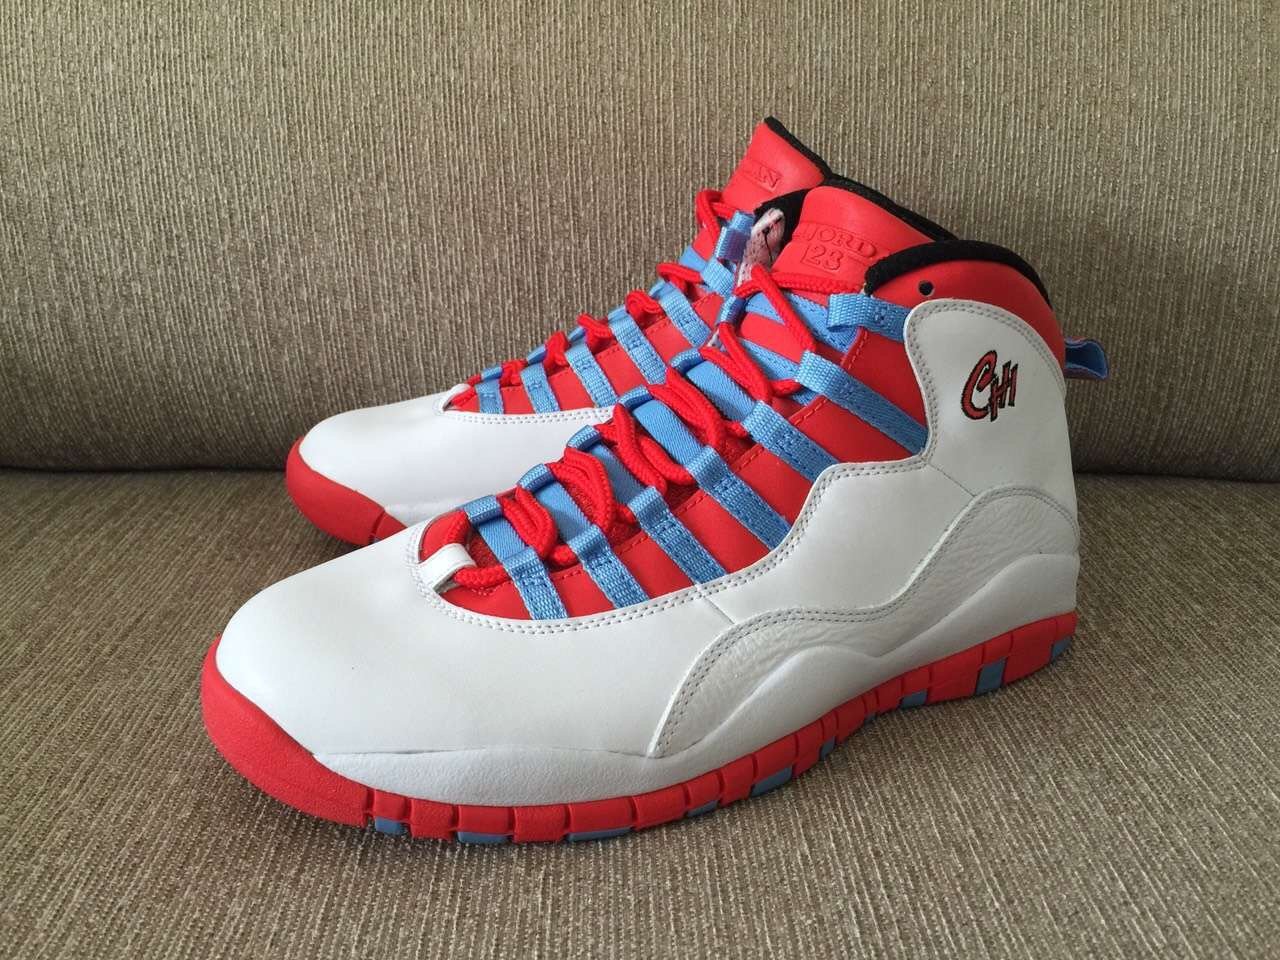 retro 10 blue and red